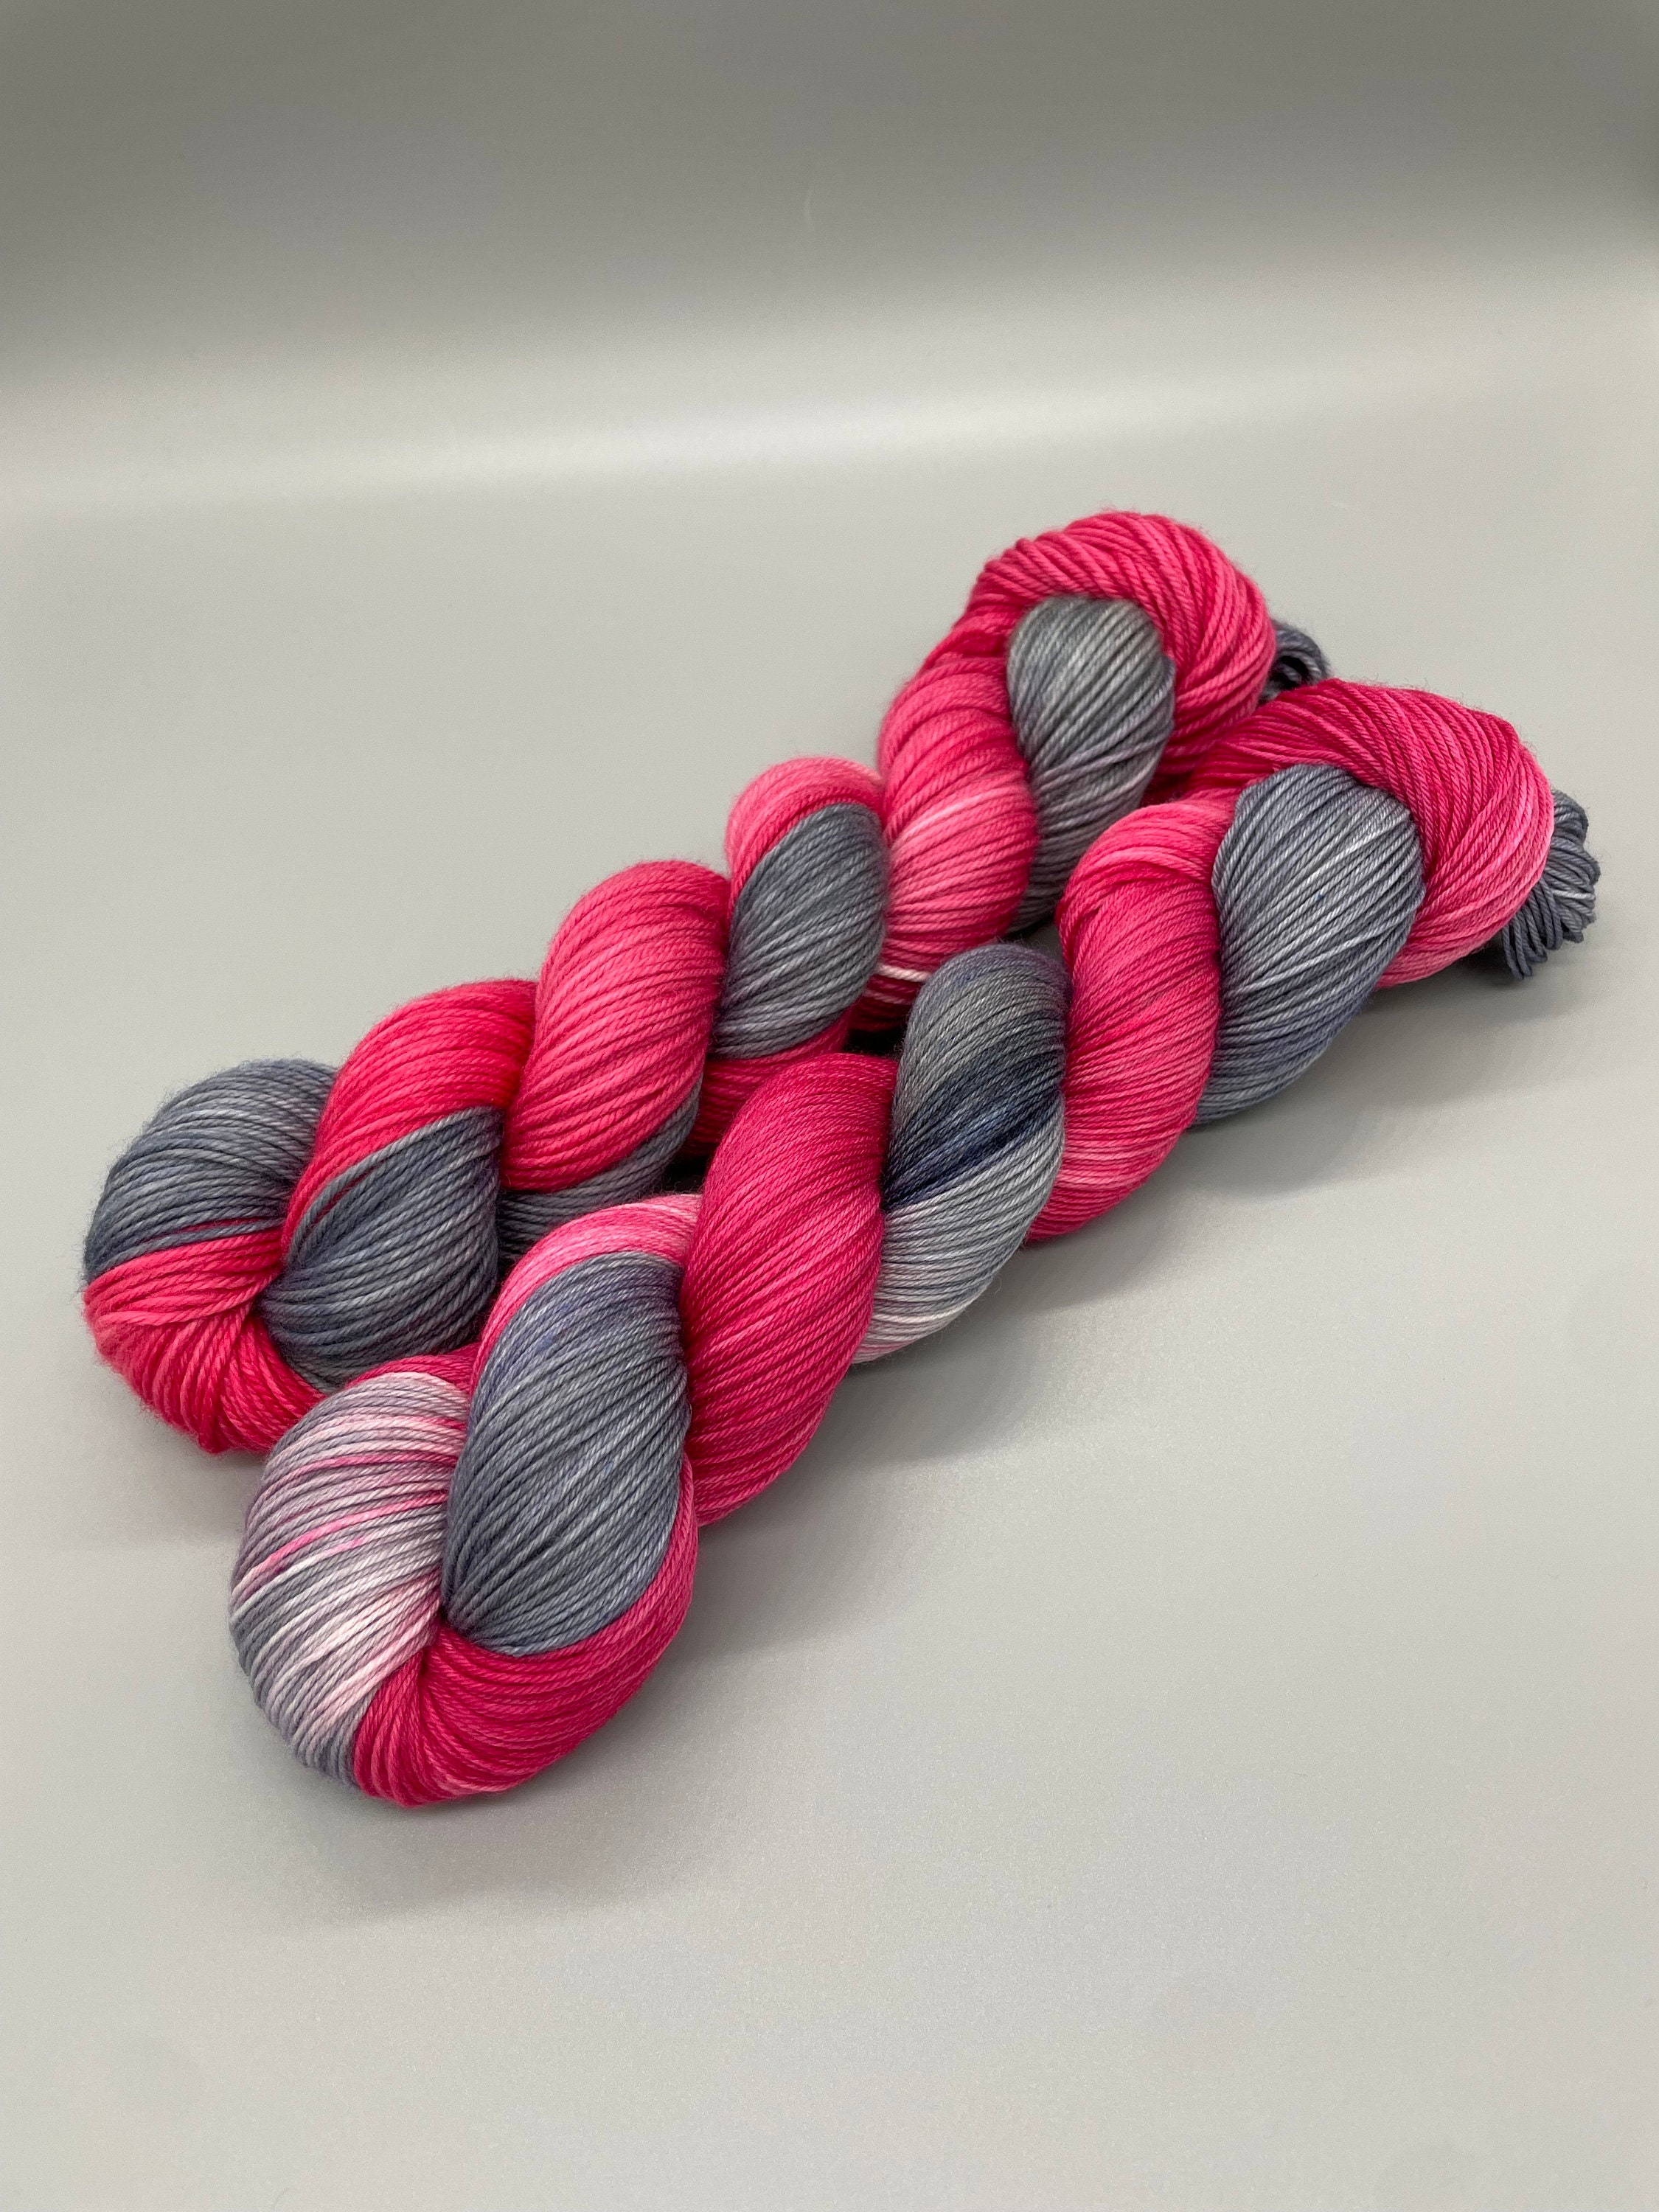 Red Worsted Weight Recycled Cashmere Yarn – thoughtful rose